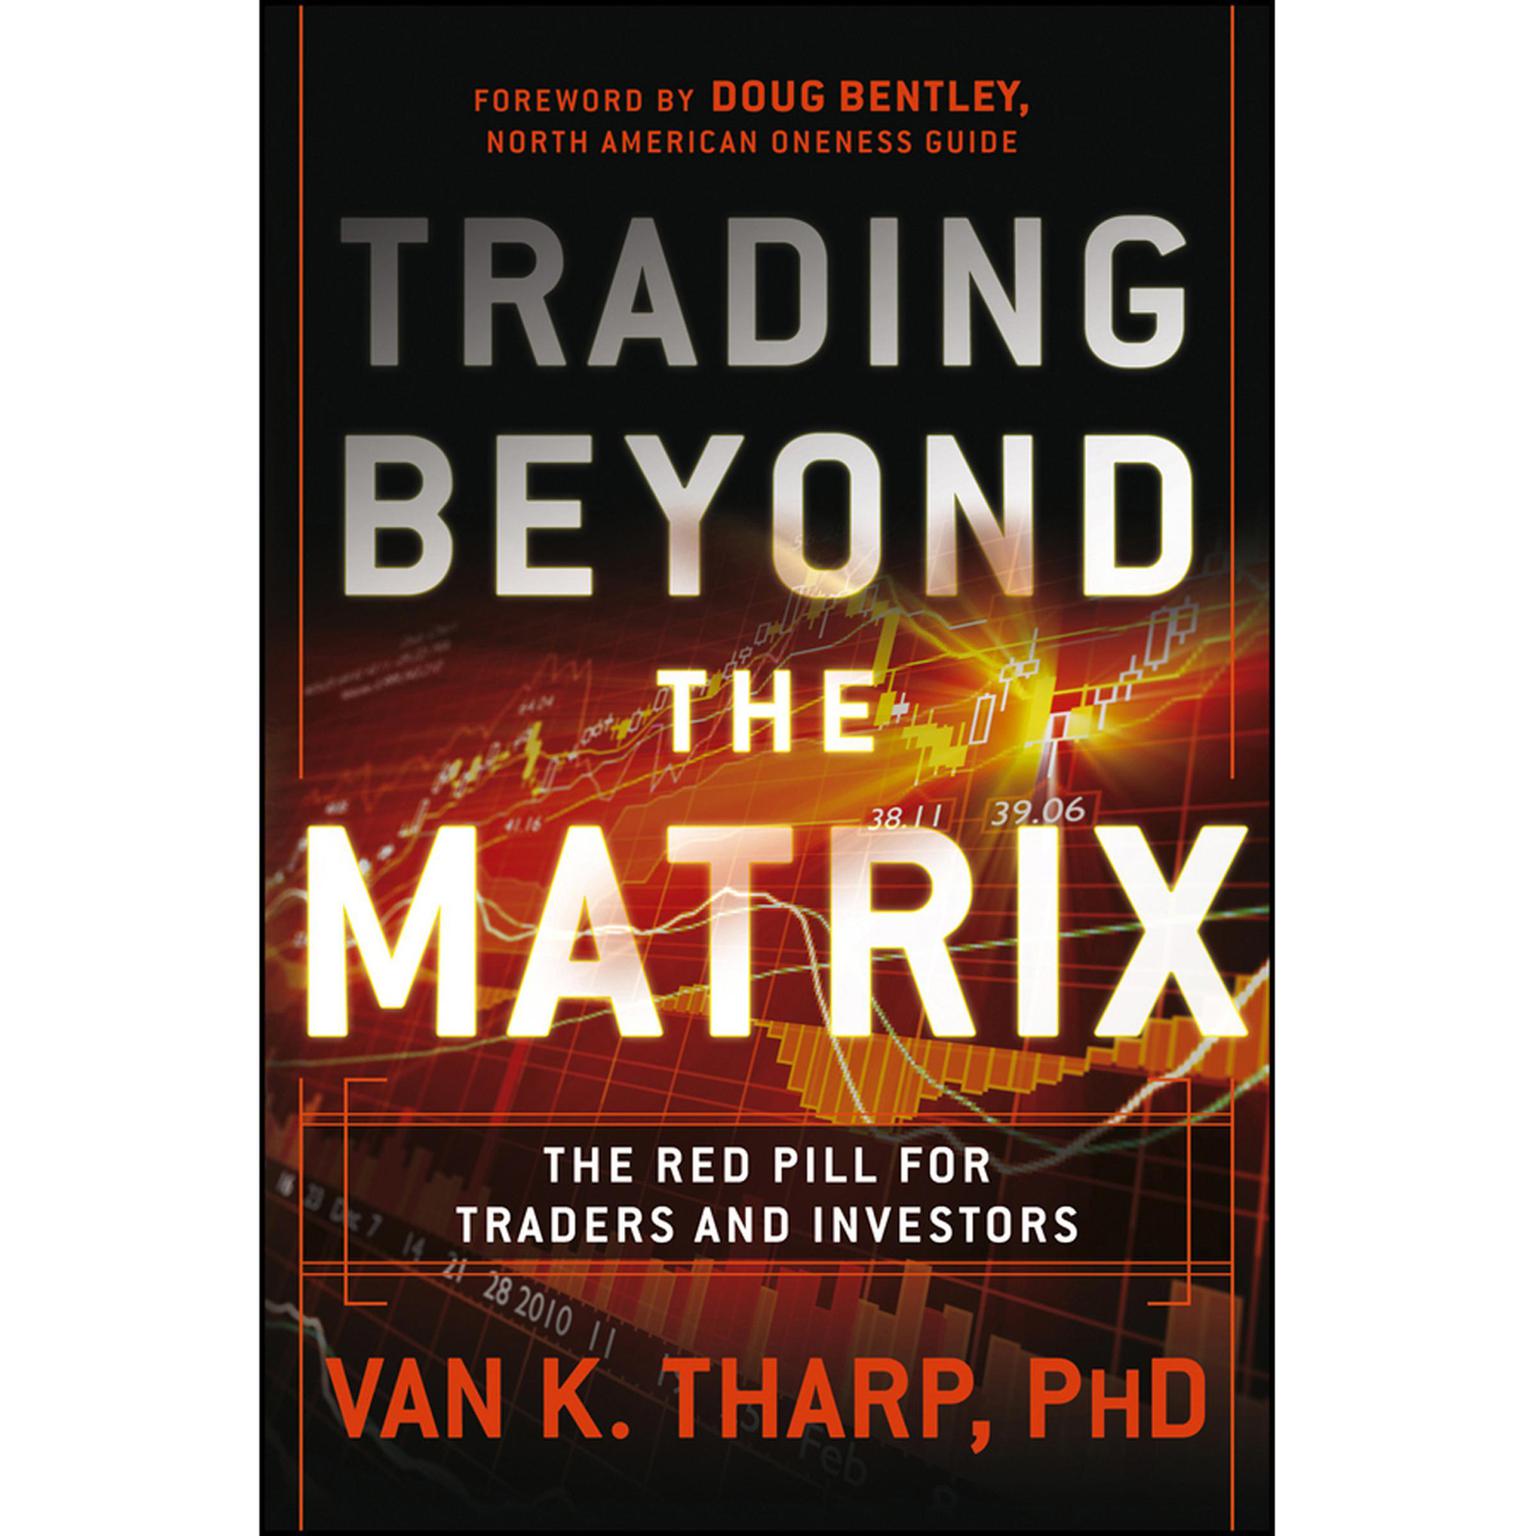 Trading Beyond the Matrix: The Red Pill for Traders and Investors Audiobook, by Van K. Tharp